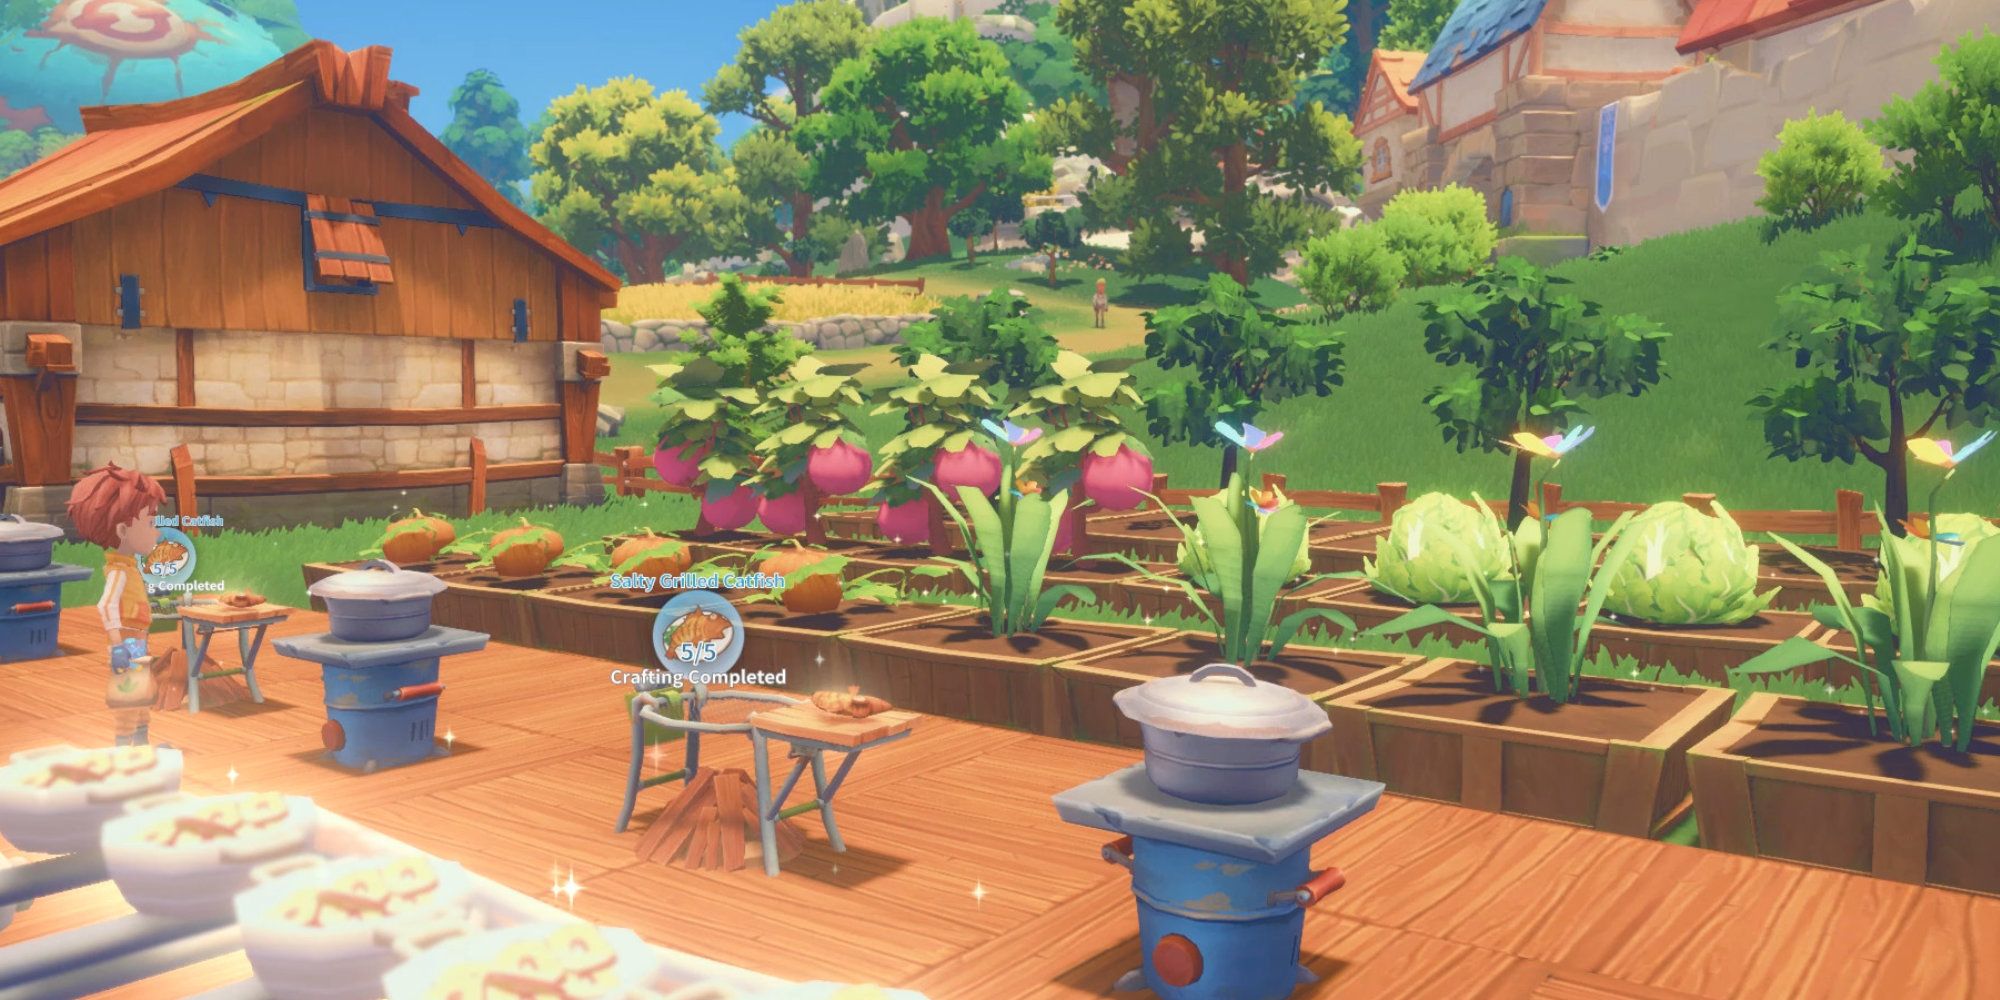 My Time At Portia player overlooking their farm as items craft